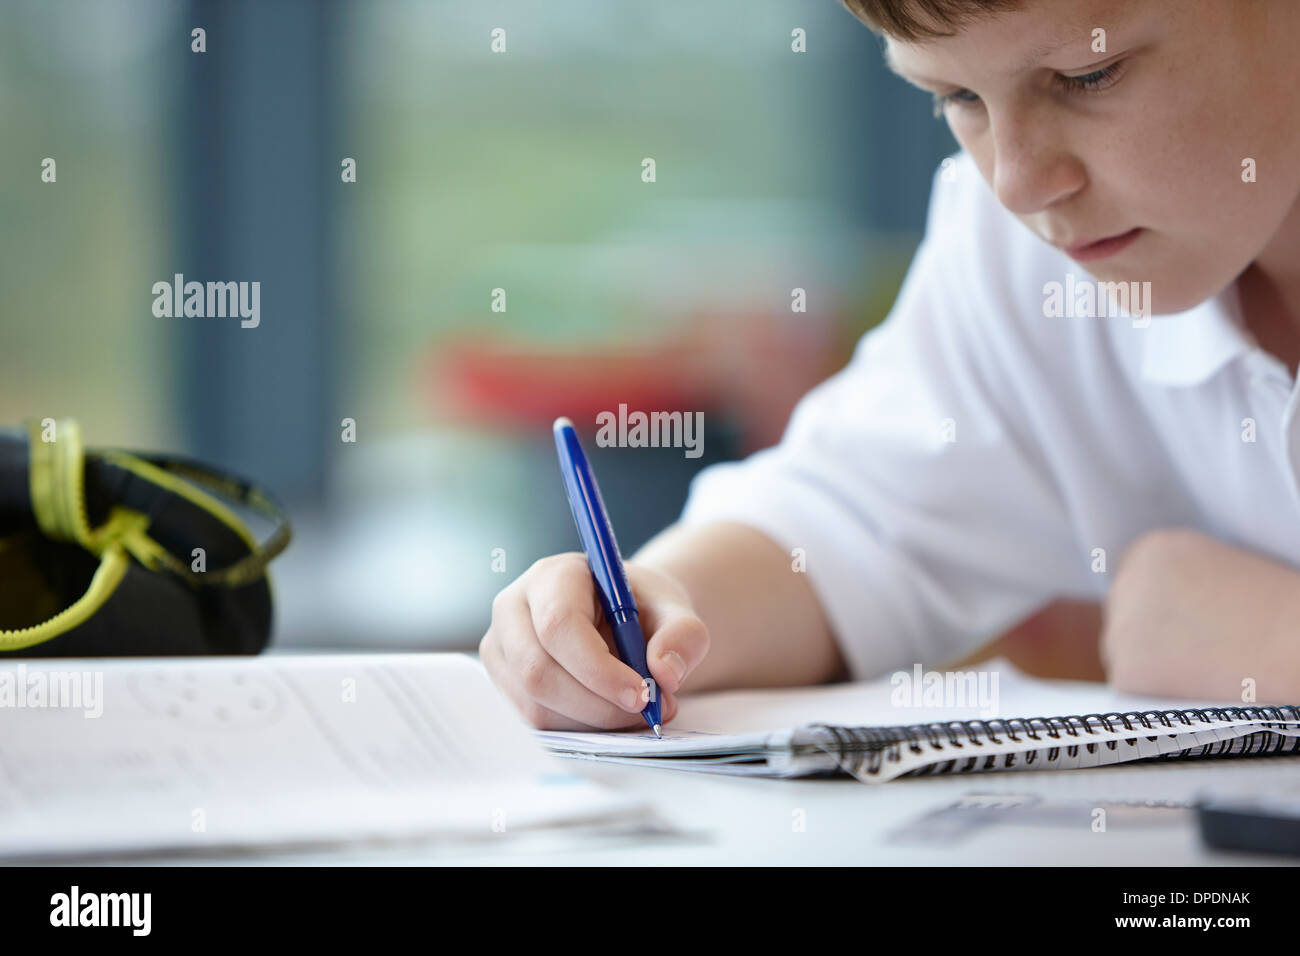 Close up of schoolboy writing in class Stock Photo